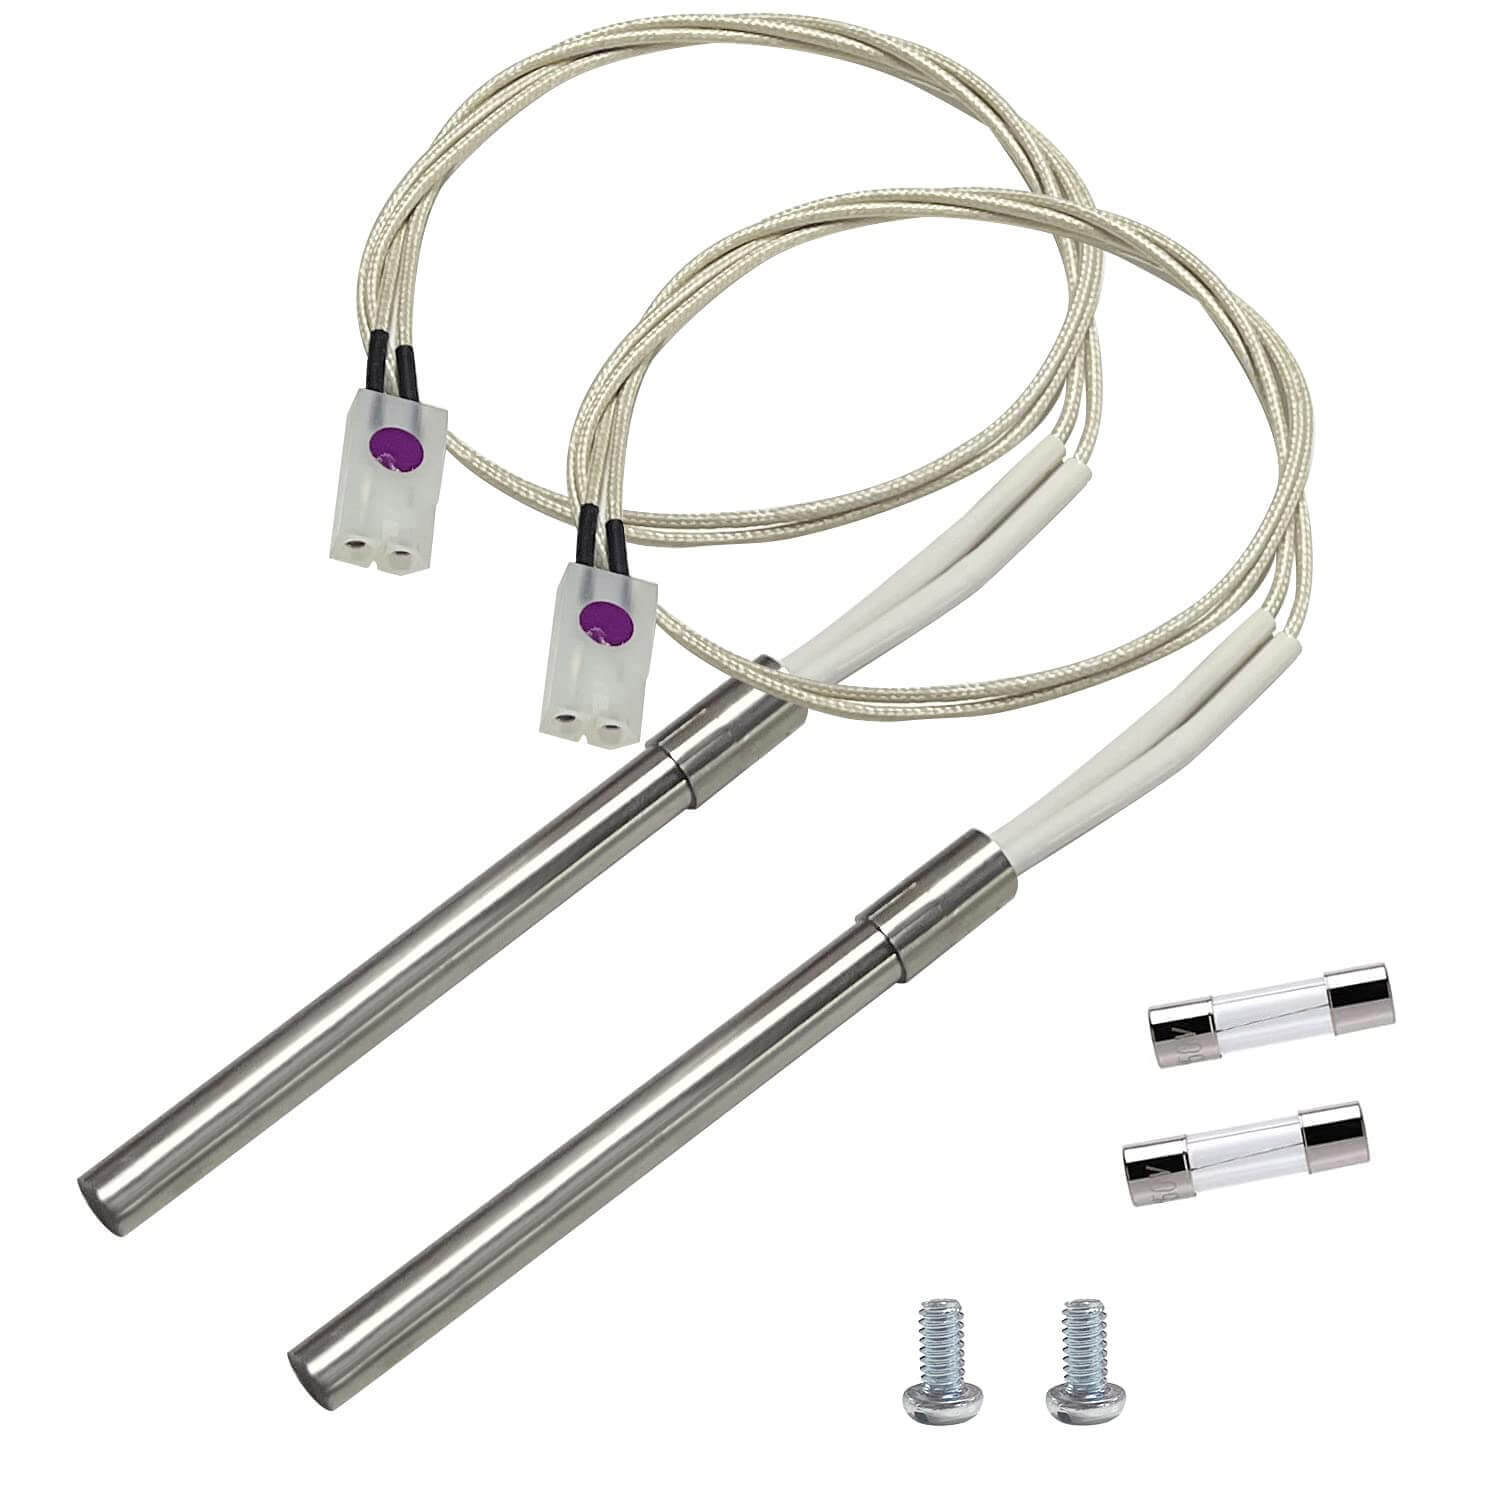 Igniter Kit Replacement for Pit Boss&Camp Chef Grills, 200W Hot Rod -YAOAWE